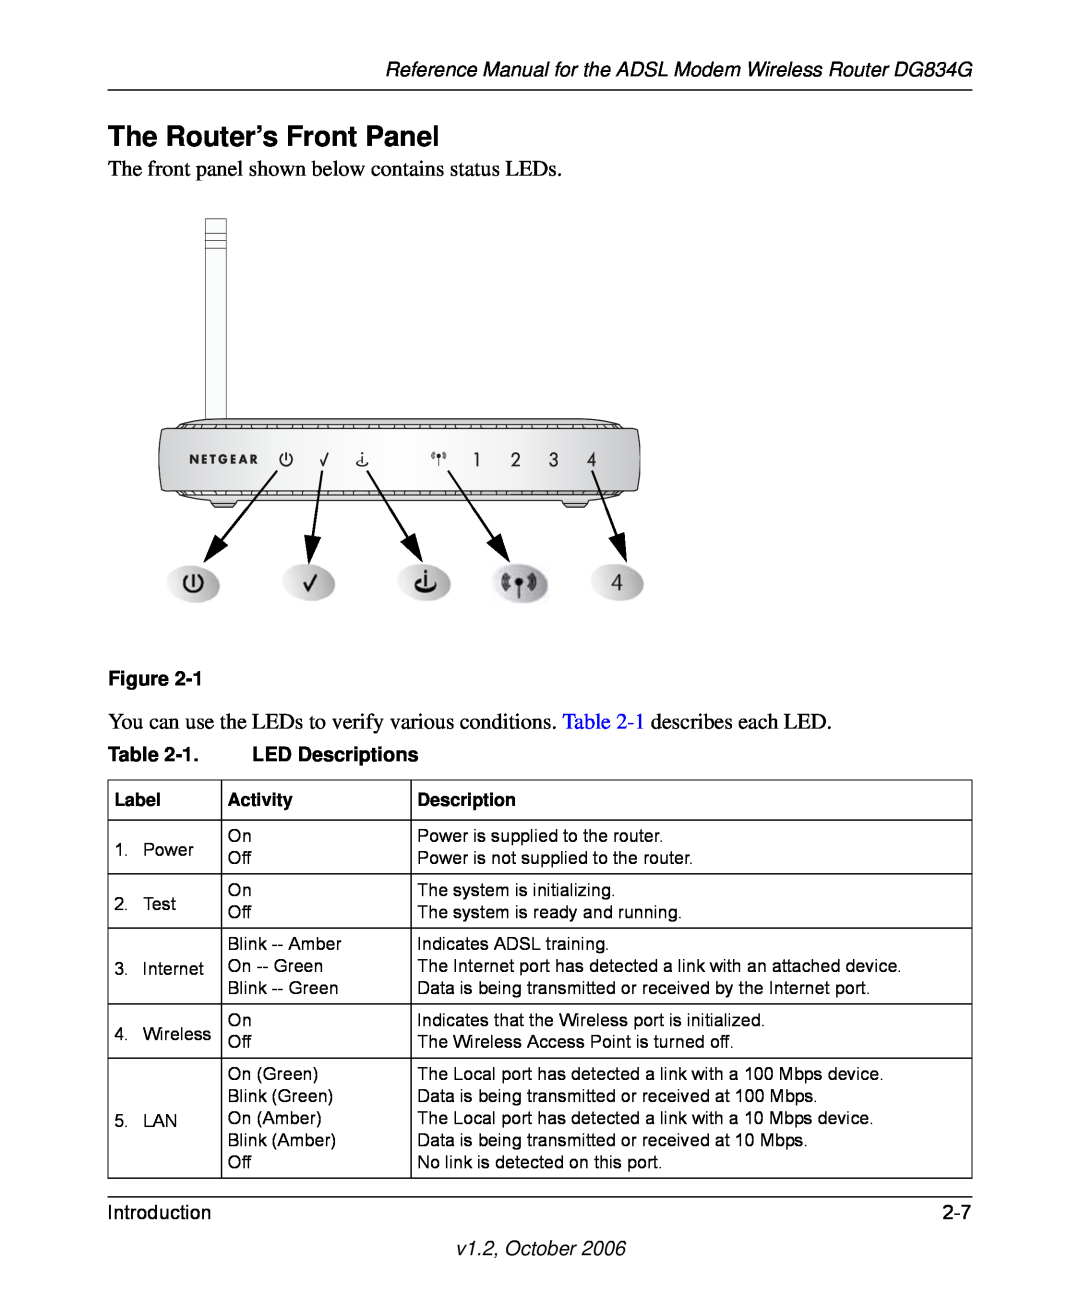 NETGEAR manual The Router’s Front Panel, Reference Manual for the ADSL Modem Wireless Router DG834G, LED Descriptions 